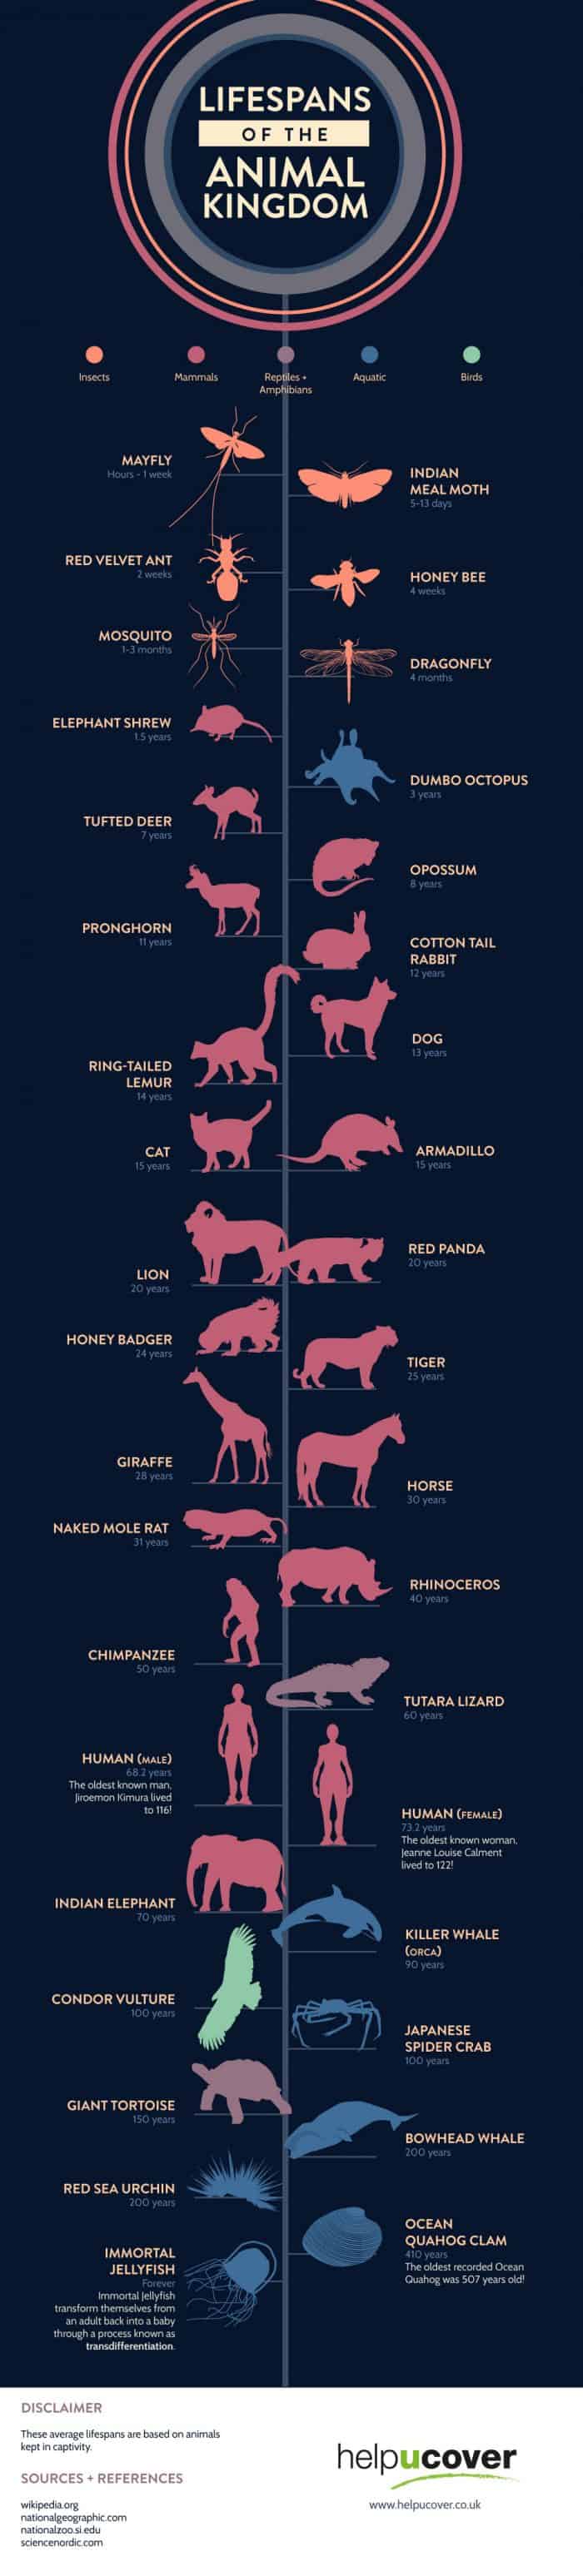 Life Spans of the Animal Kingdom Infographic